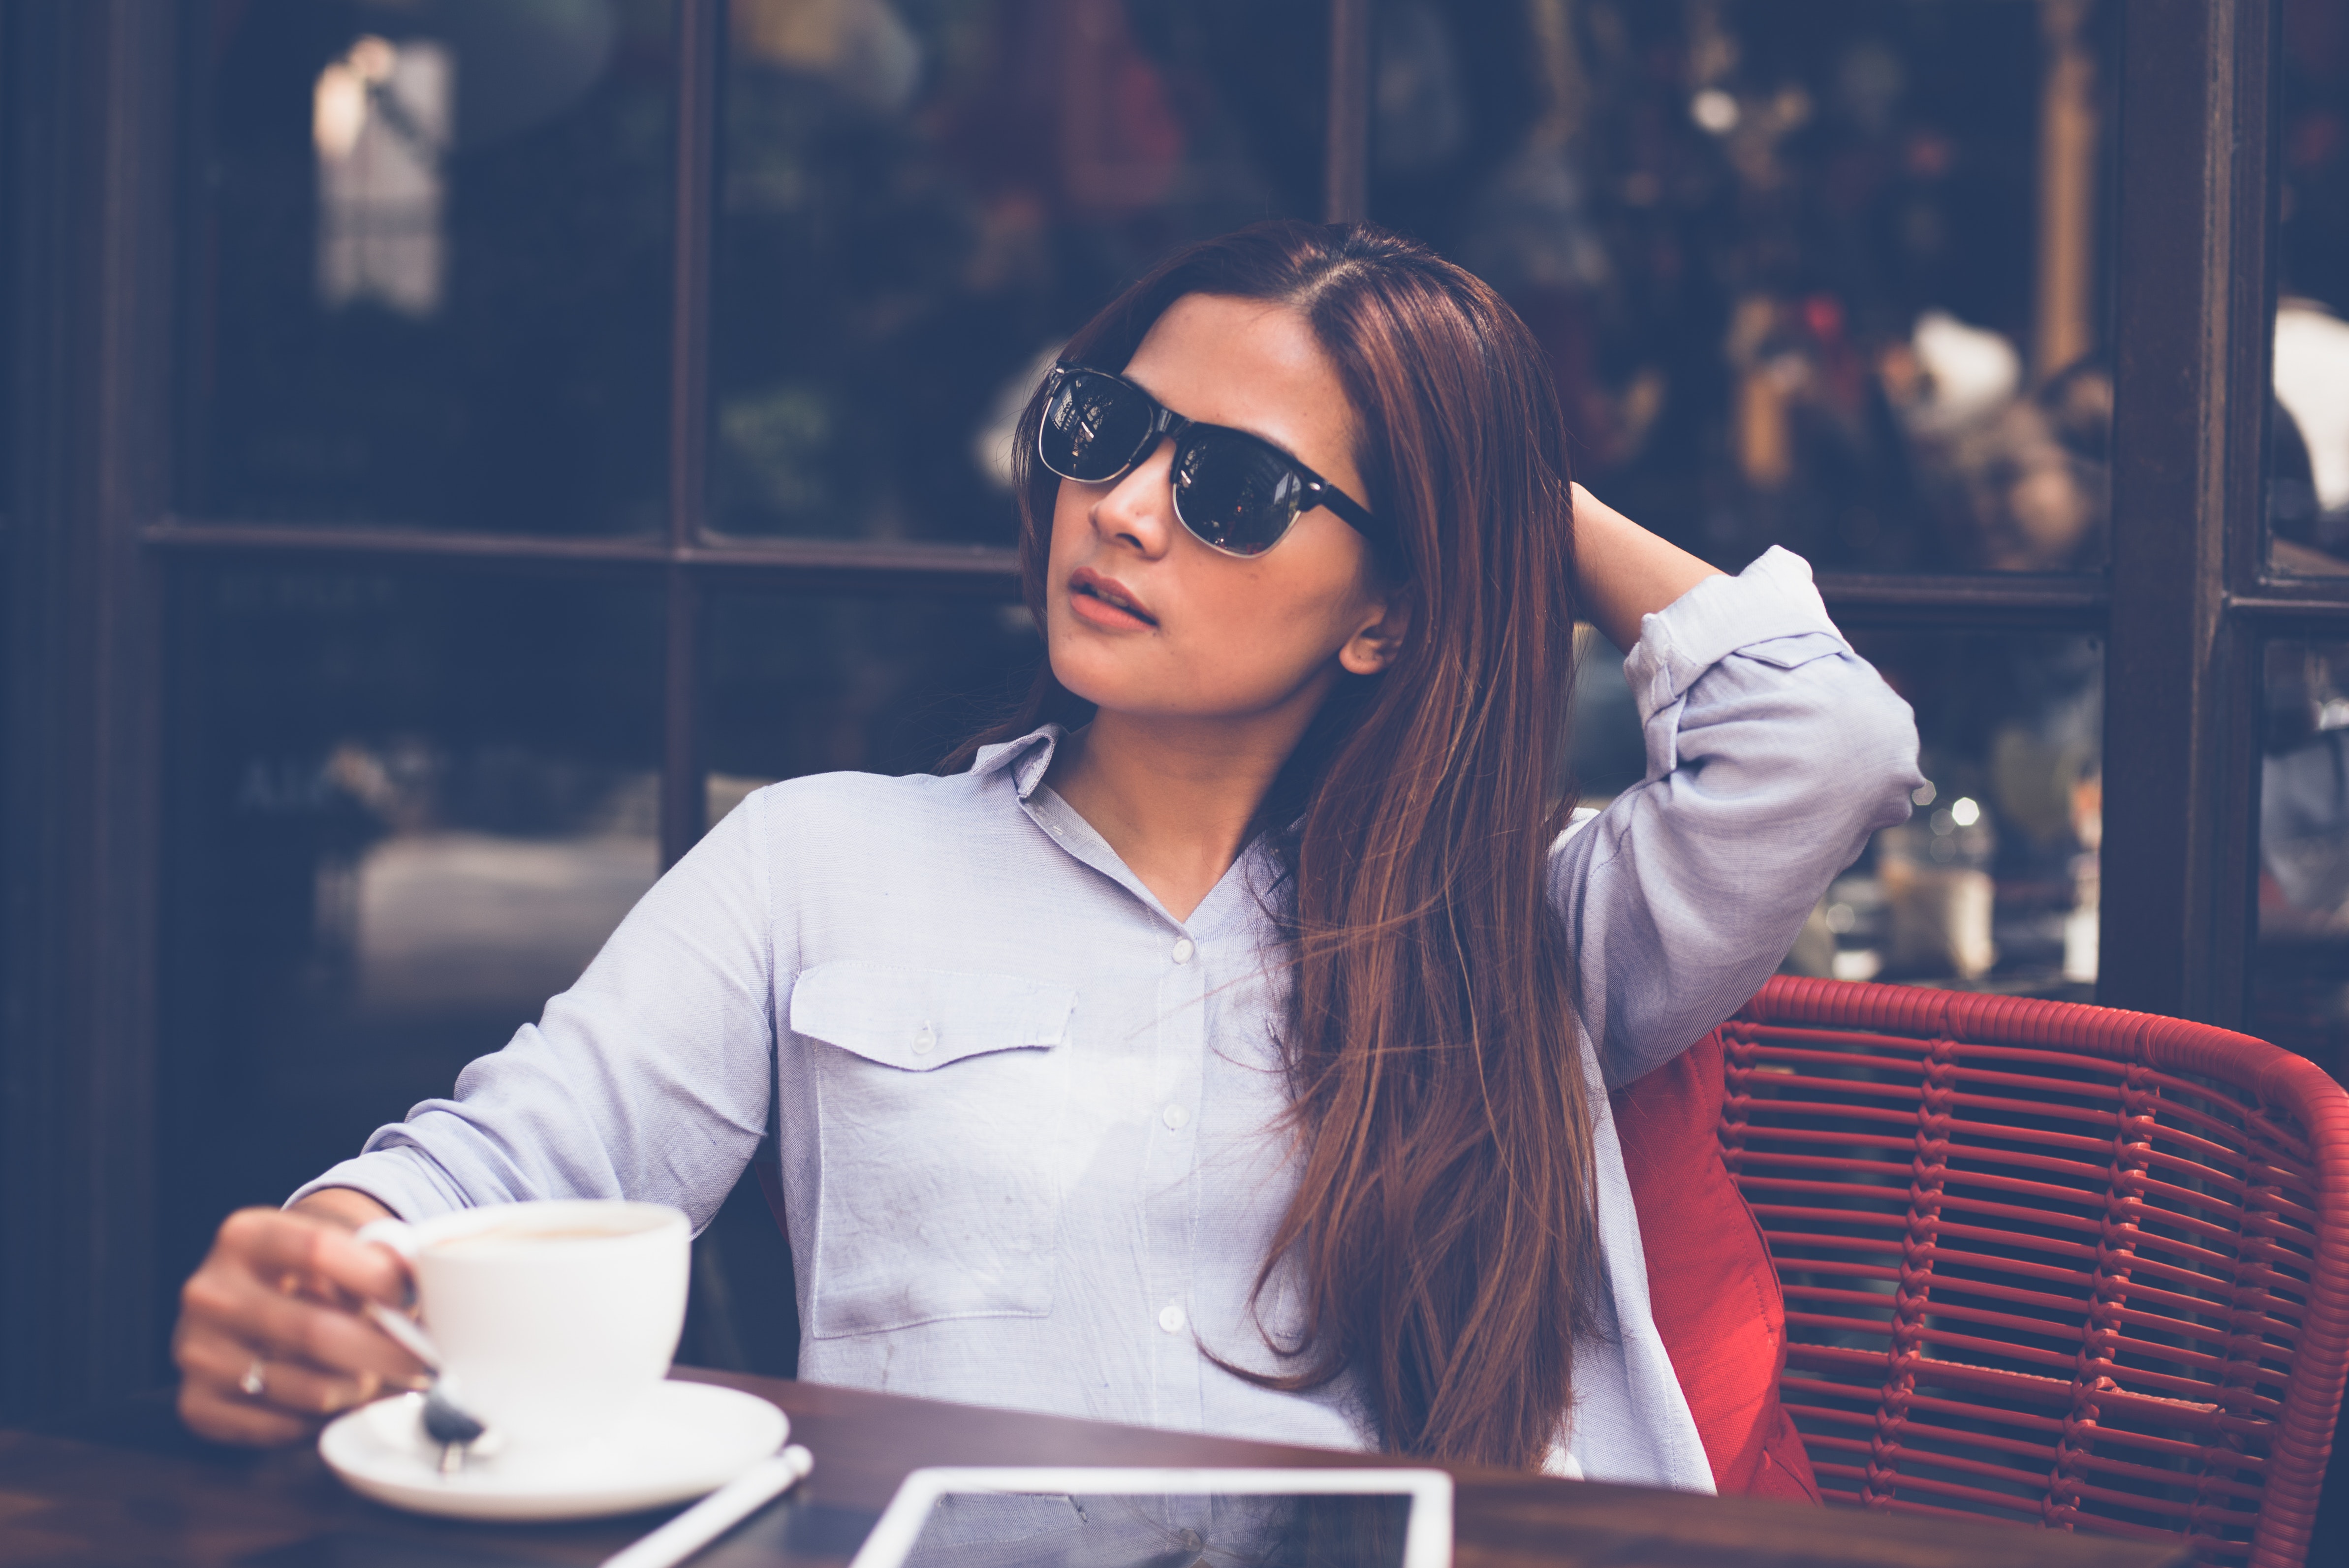 Portrait of Young Woman Drinking Coffee at Home, Adult, Sunglasses, Portrait, Relaxation, HQ Photo